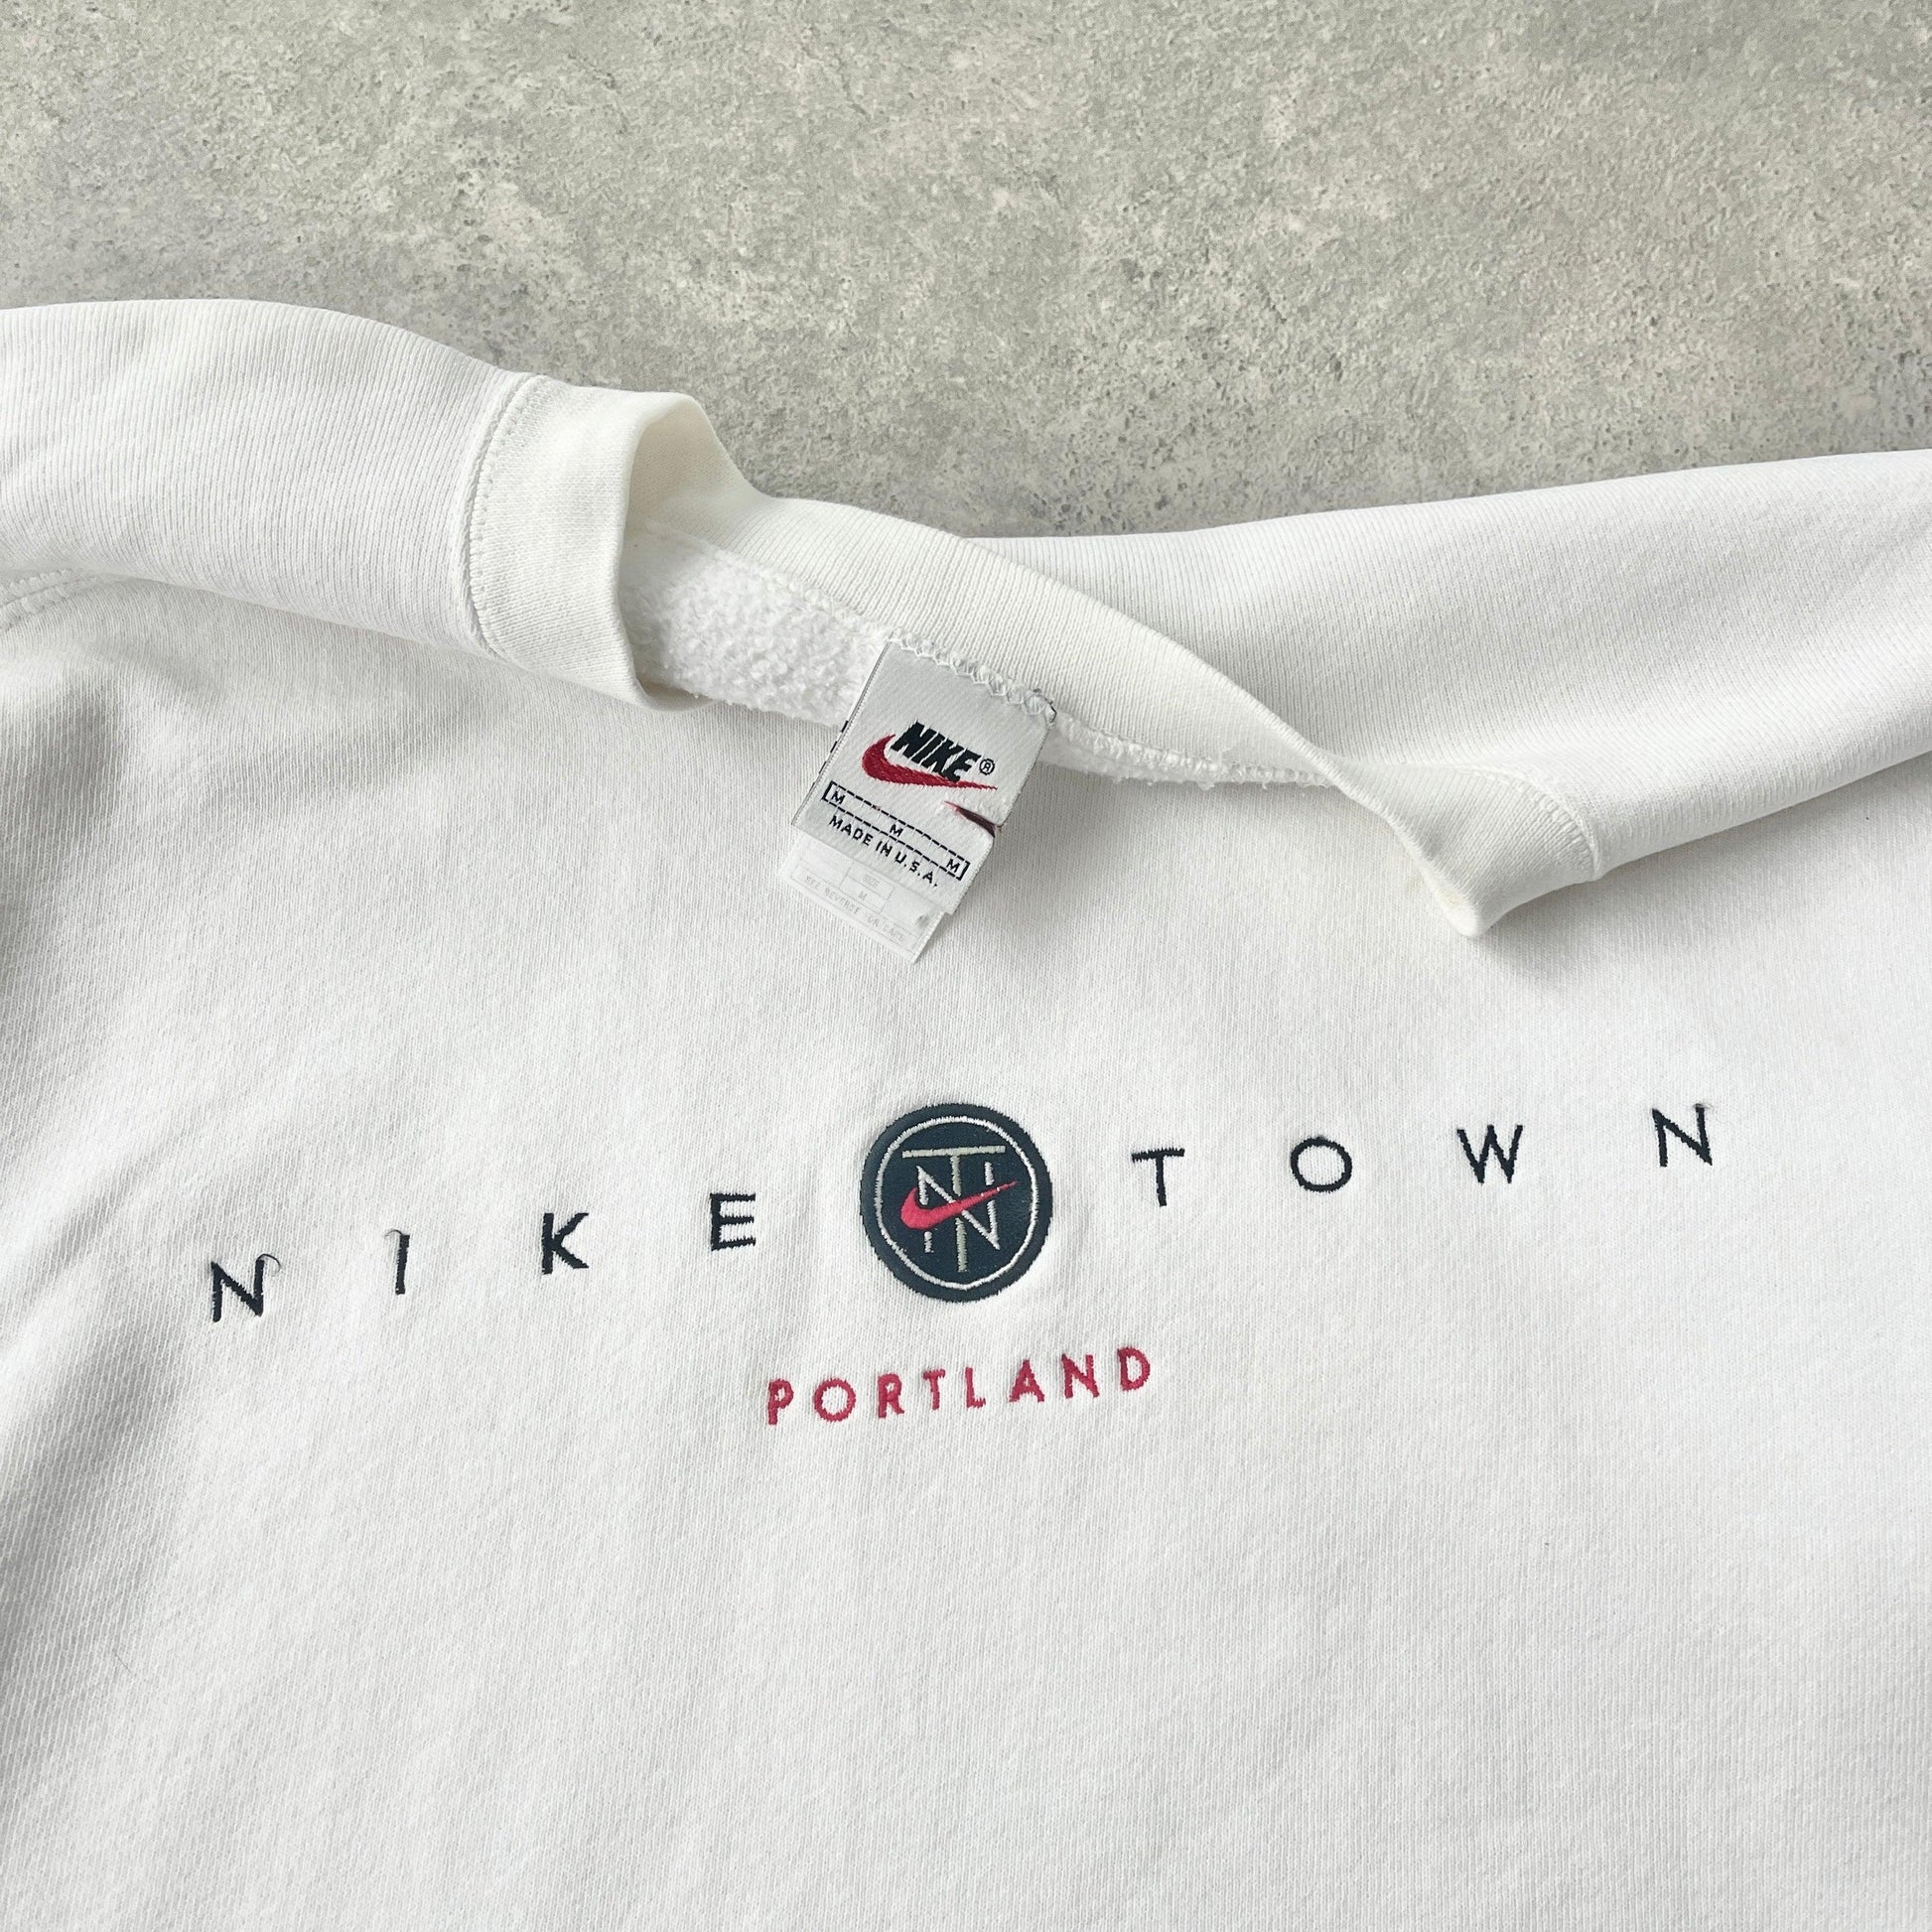 Nike Town Portland RARE 1990s heavyweight embroidered sweatshirt (M) - Known Source